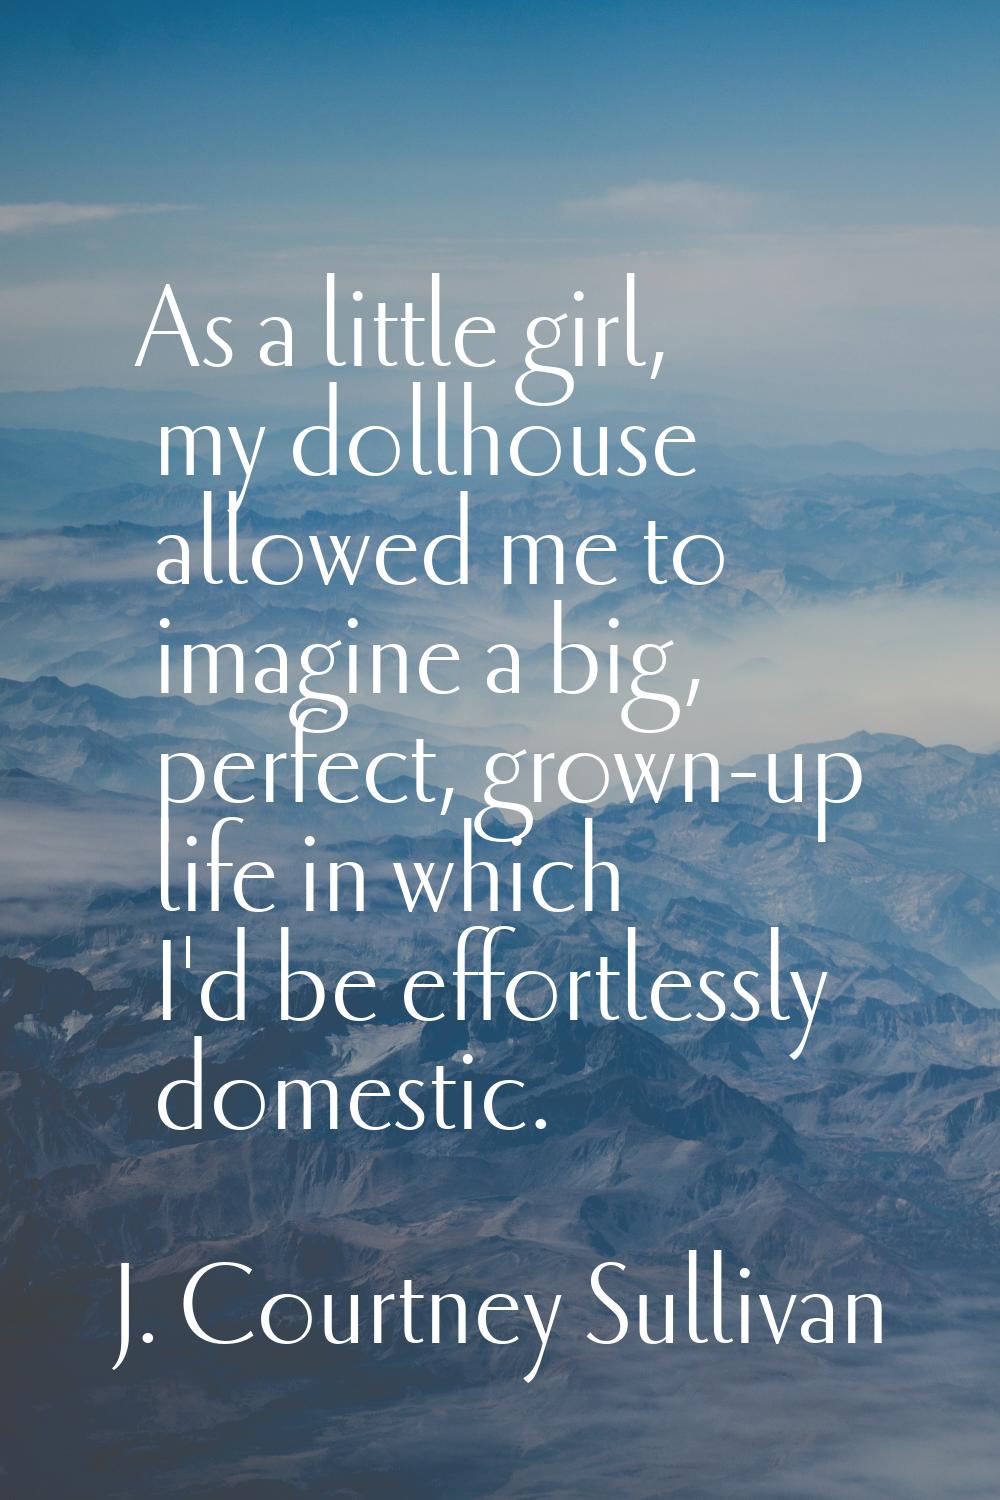 As a little girl, my dollhouse allowed me to imagine a big, perfect, grown-up life in which I'd be 